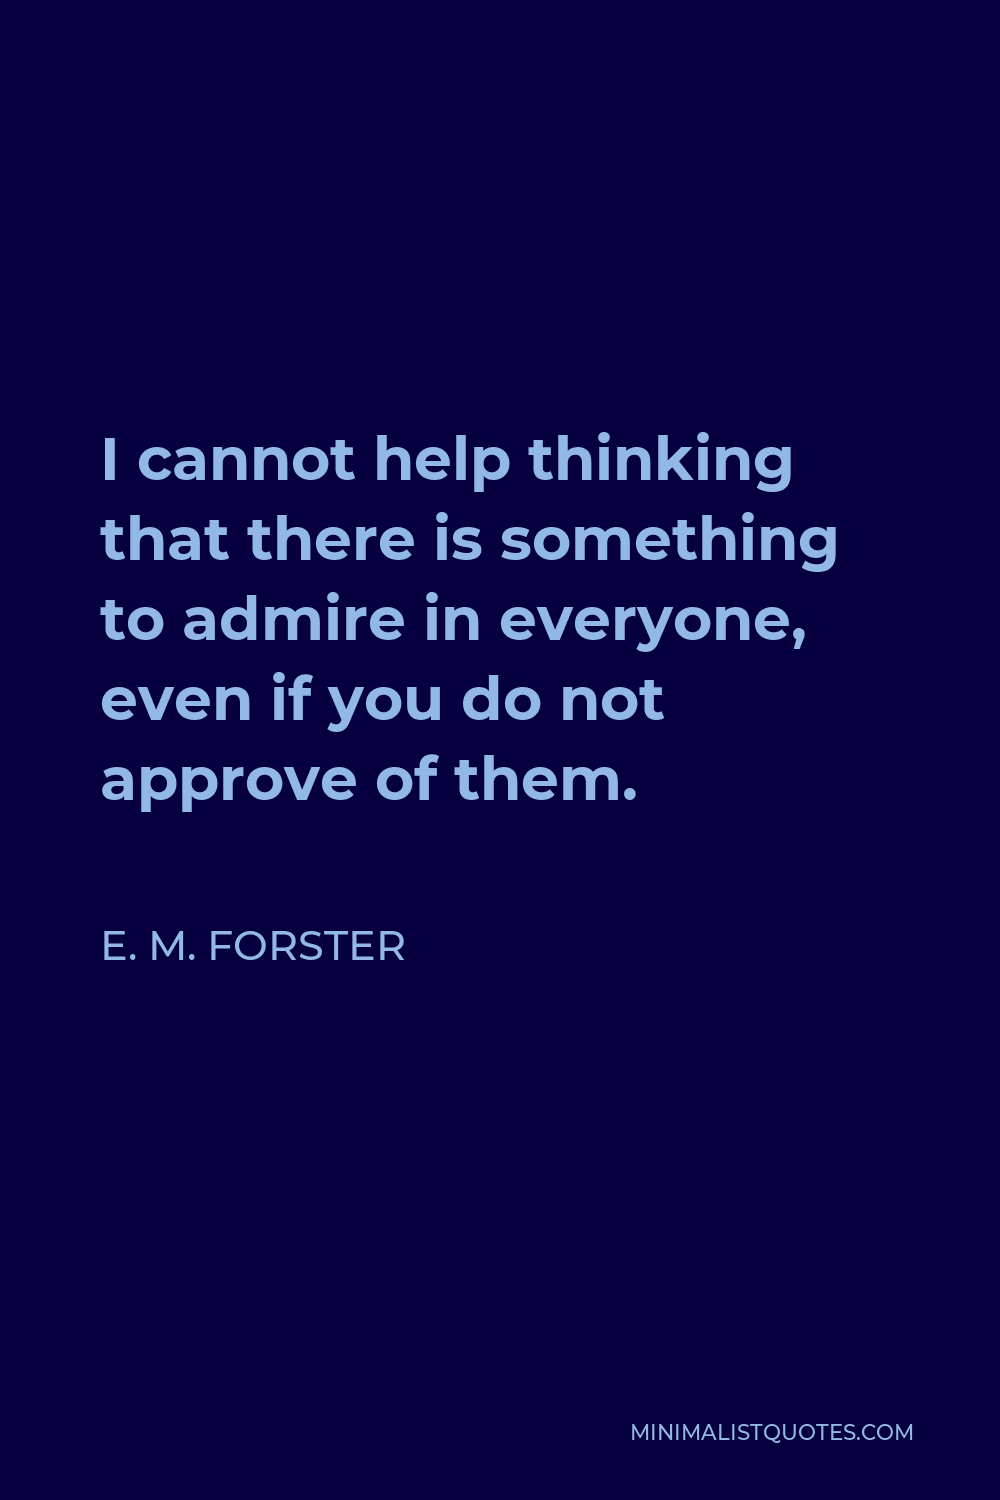 E. M. Forster Quote - I cannot help thinking that there is something to admire in everyone, even if you do not approve of them.